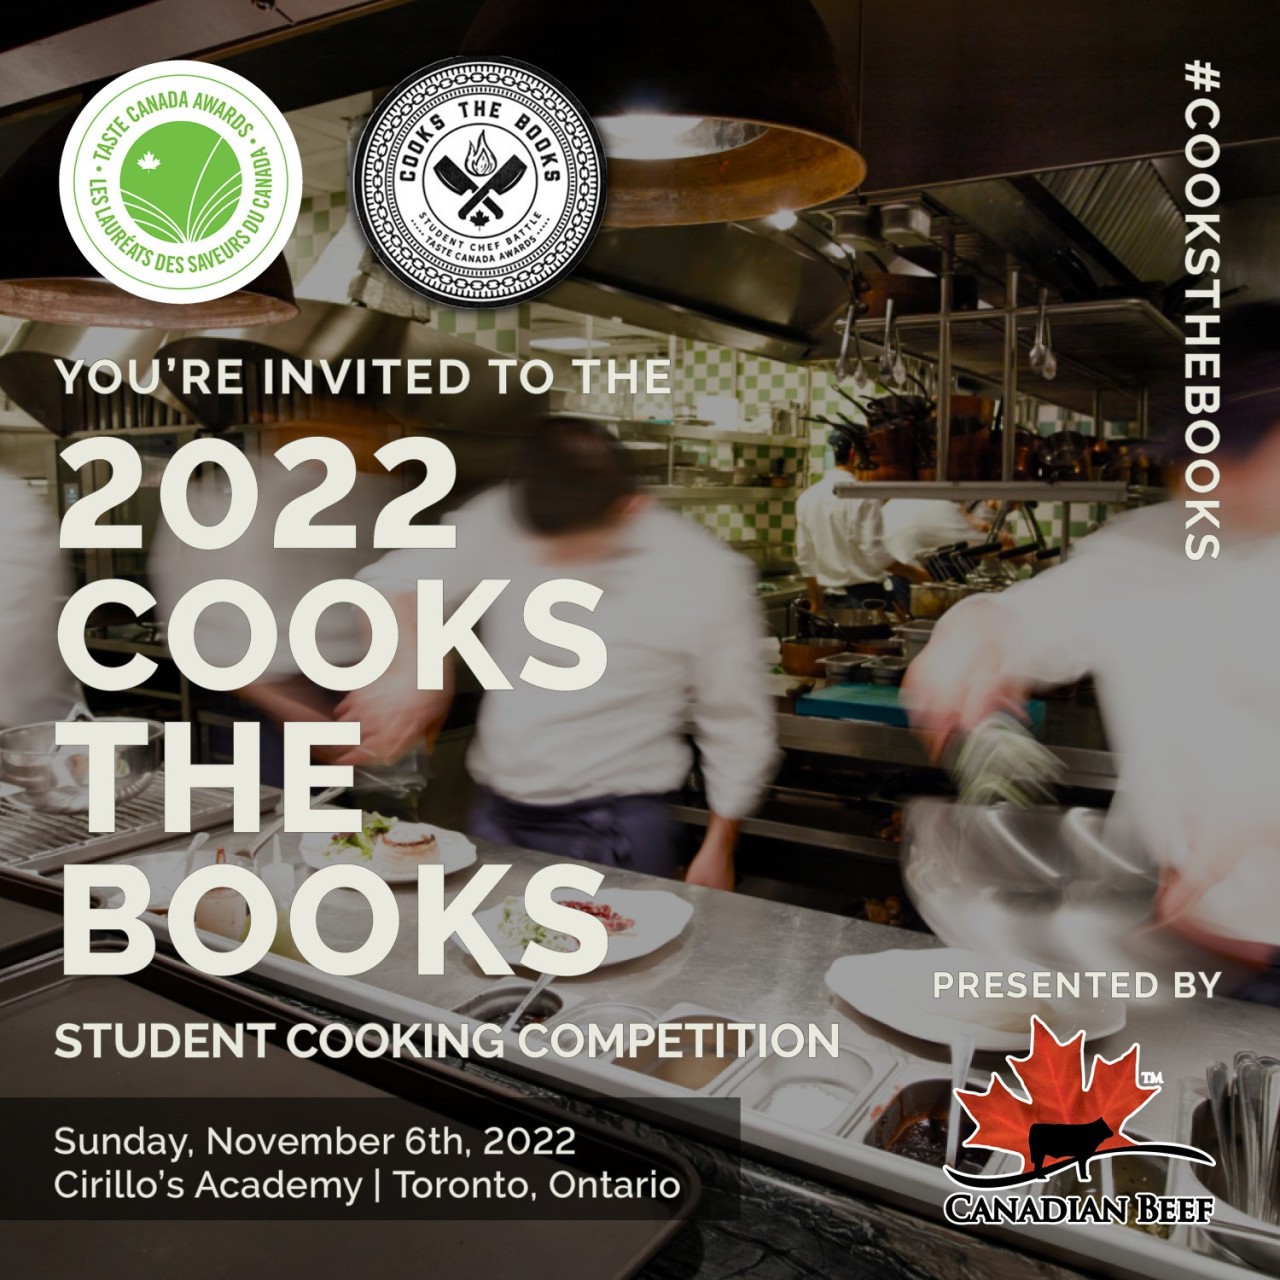 Cooks the Books - Student Cooking Competition